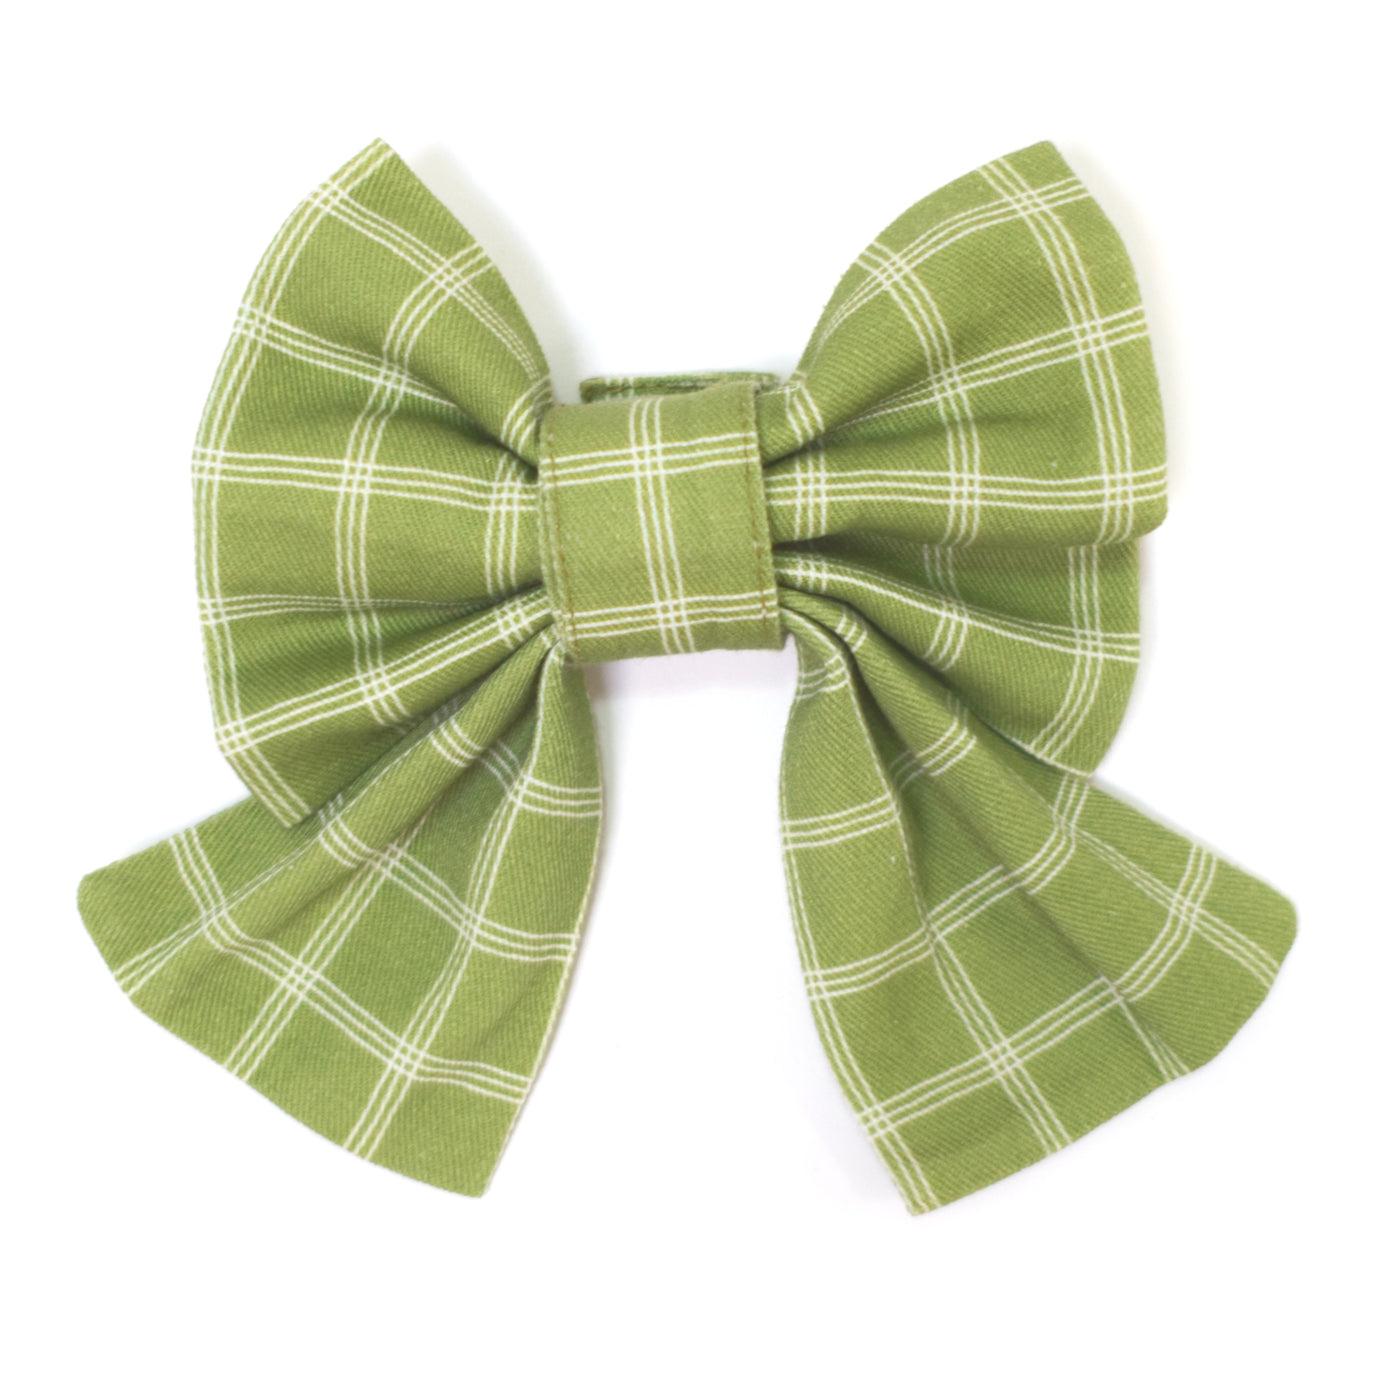 Meadow green triple windowpane plaid sailor dog bow for collars and harnesses